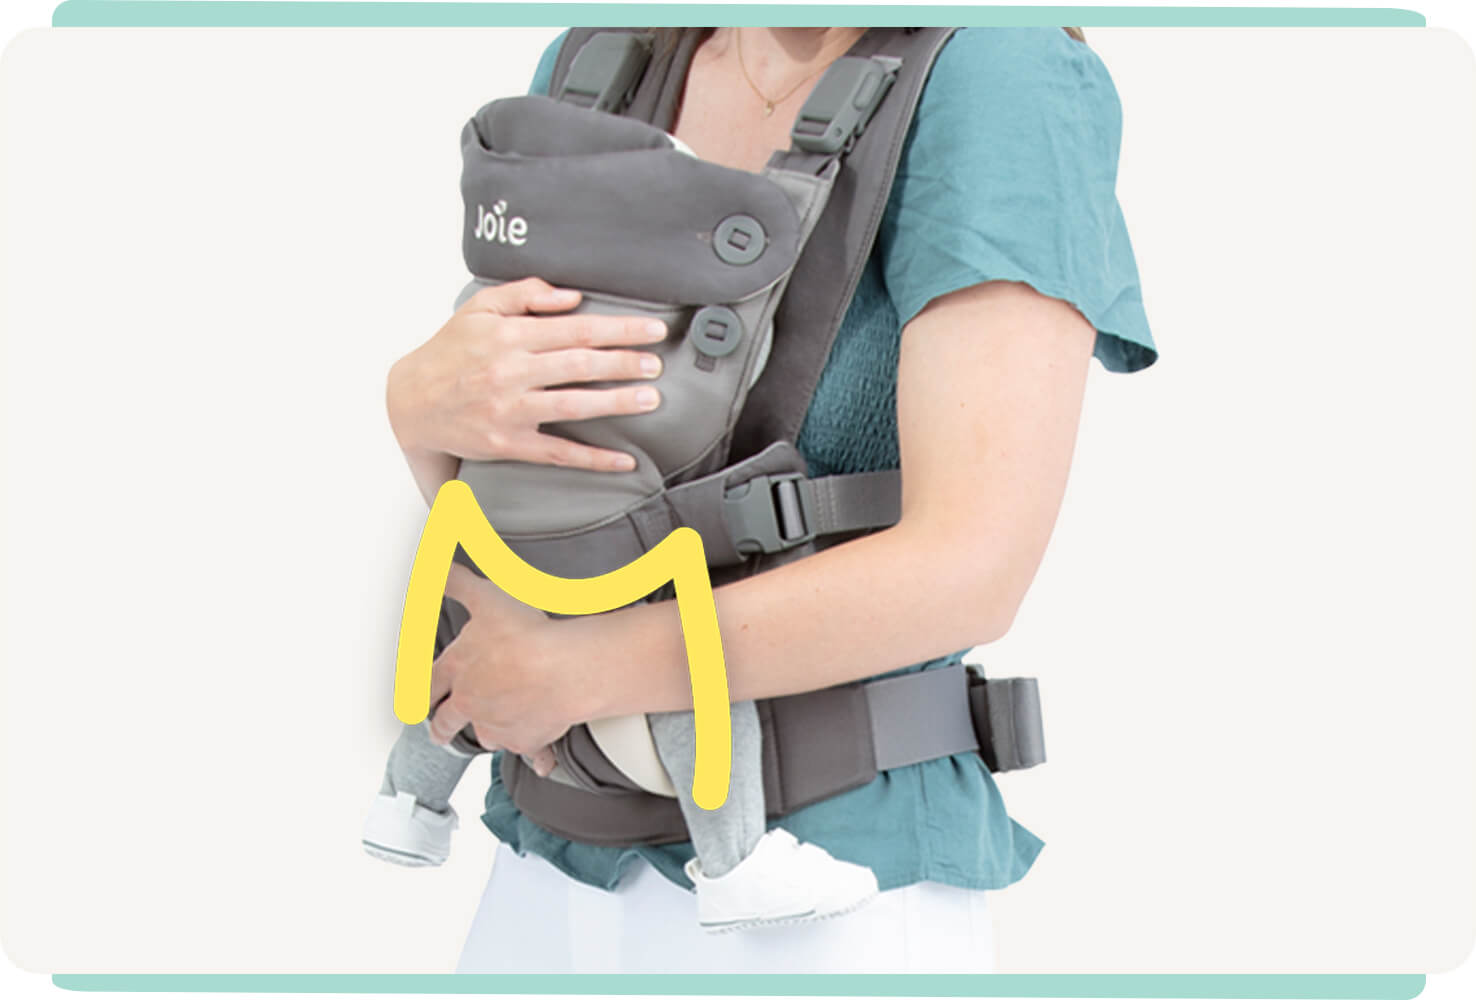 Closeup of a baby in a gray Joie Savvy Lite 3in1 baby carrier with a yellow line indicating the M shape of the baby’s hips